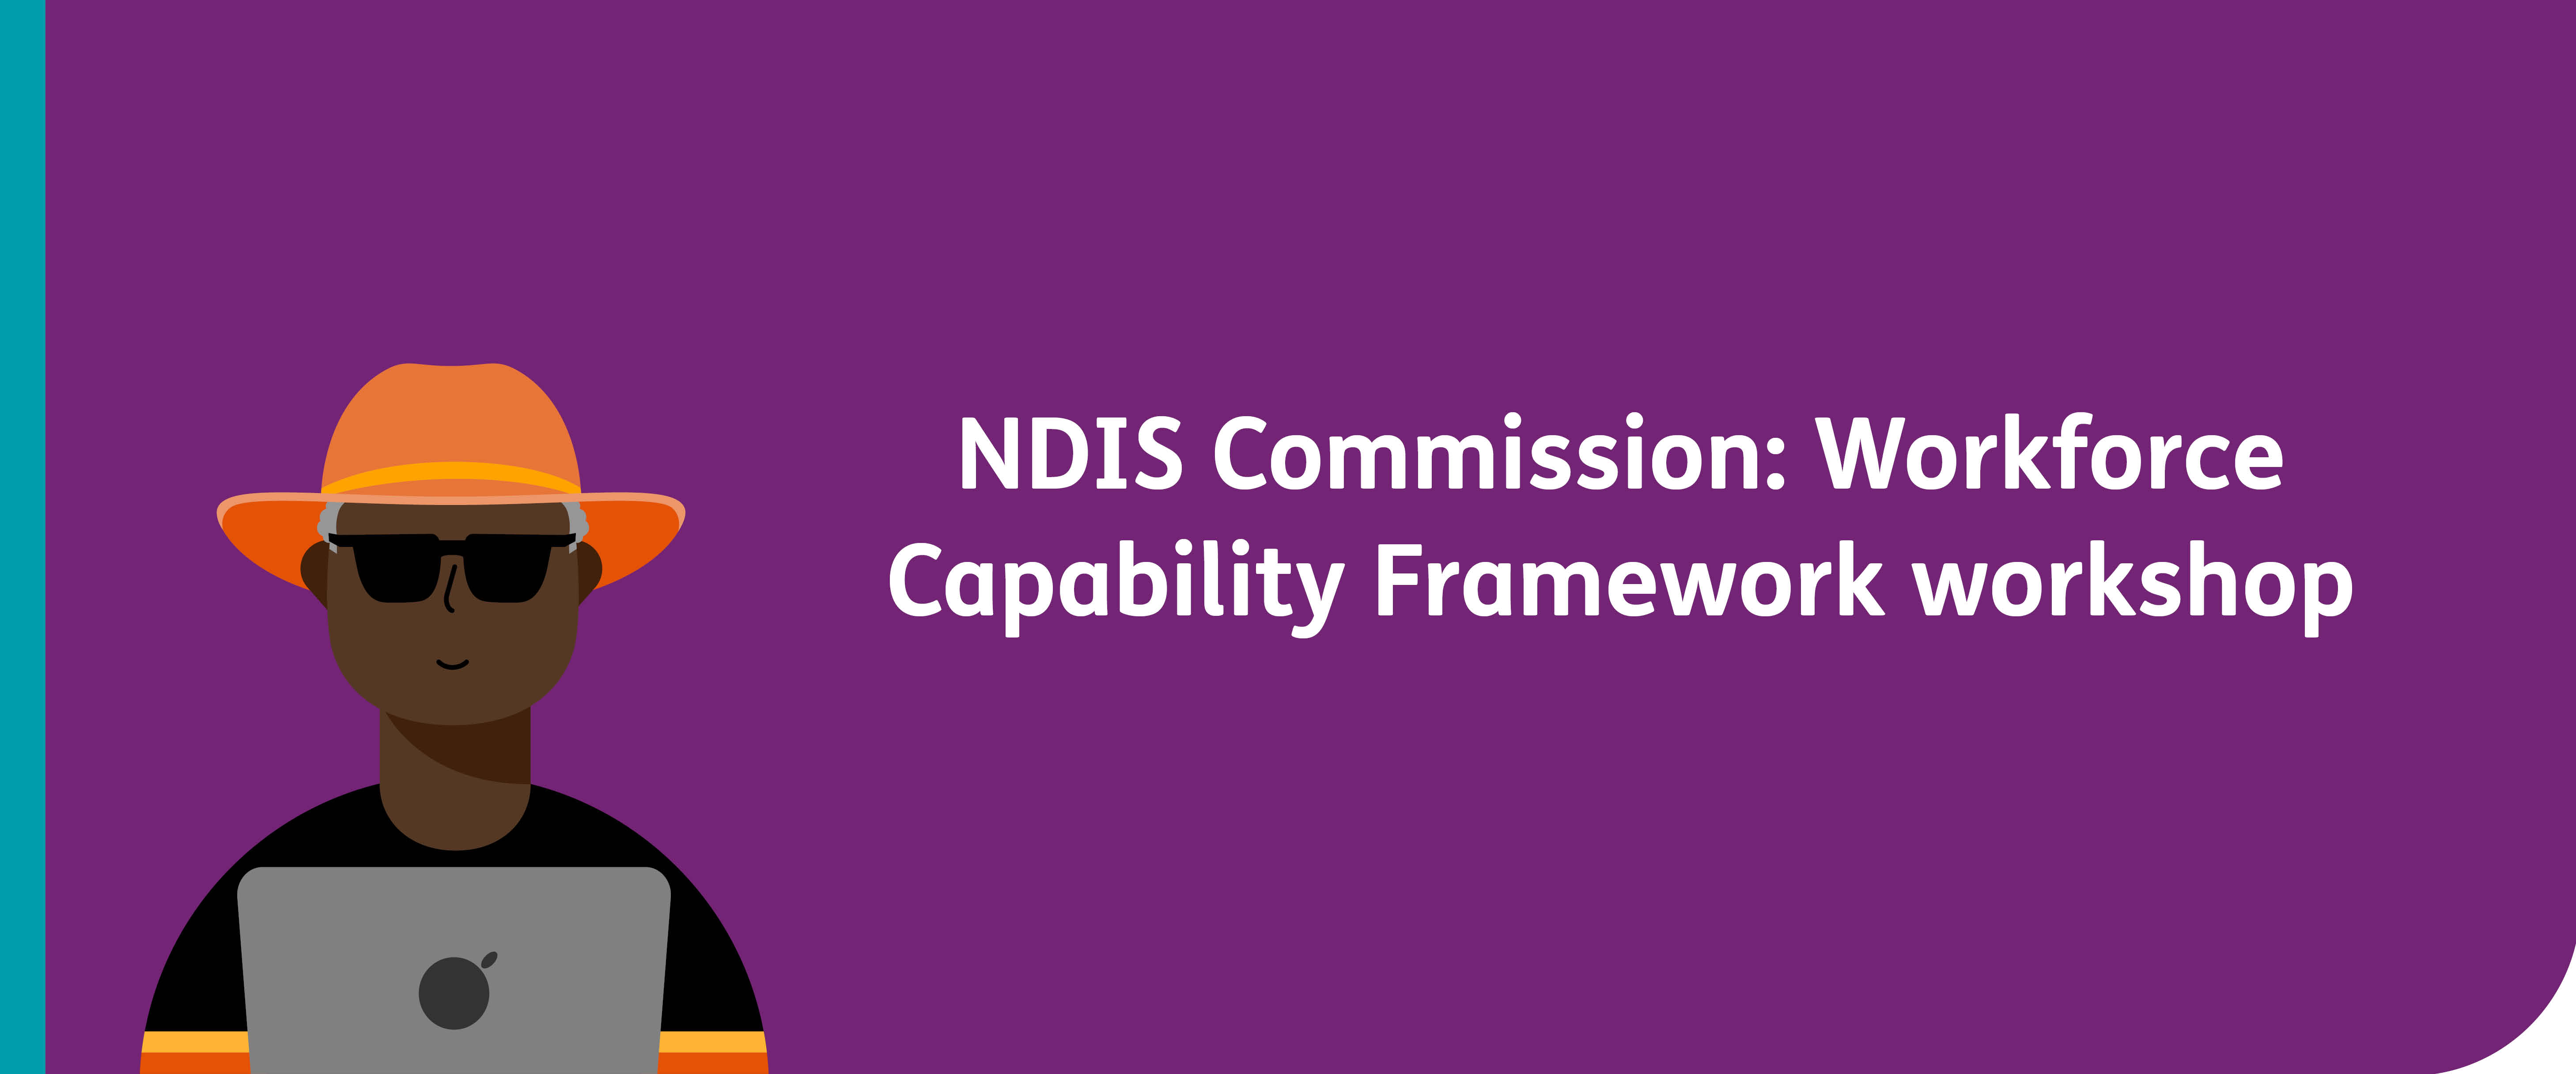 NDIS Commission: Workforce Capability Framework workshop with a cartoon of a person using a laptop